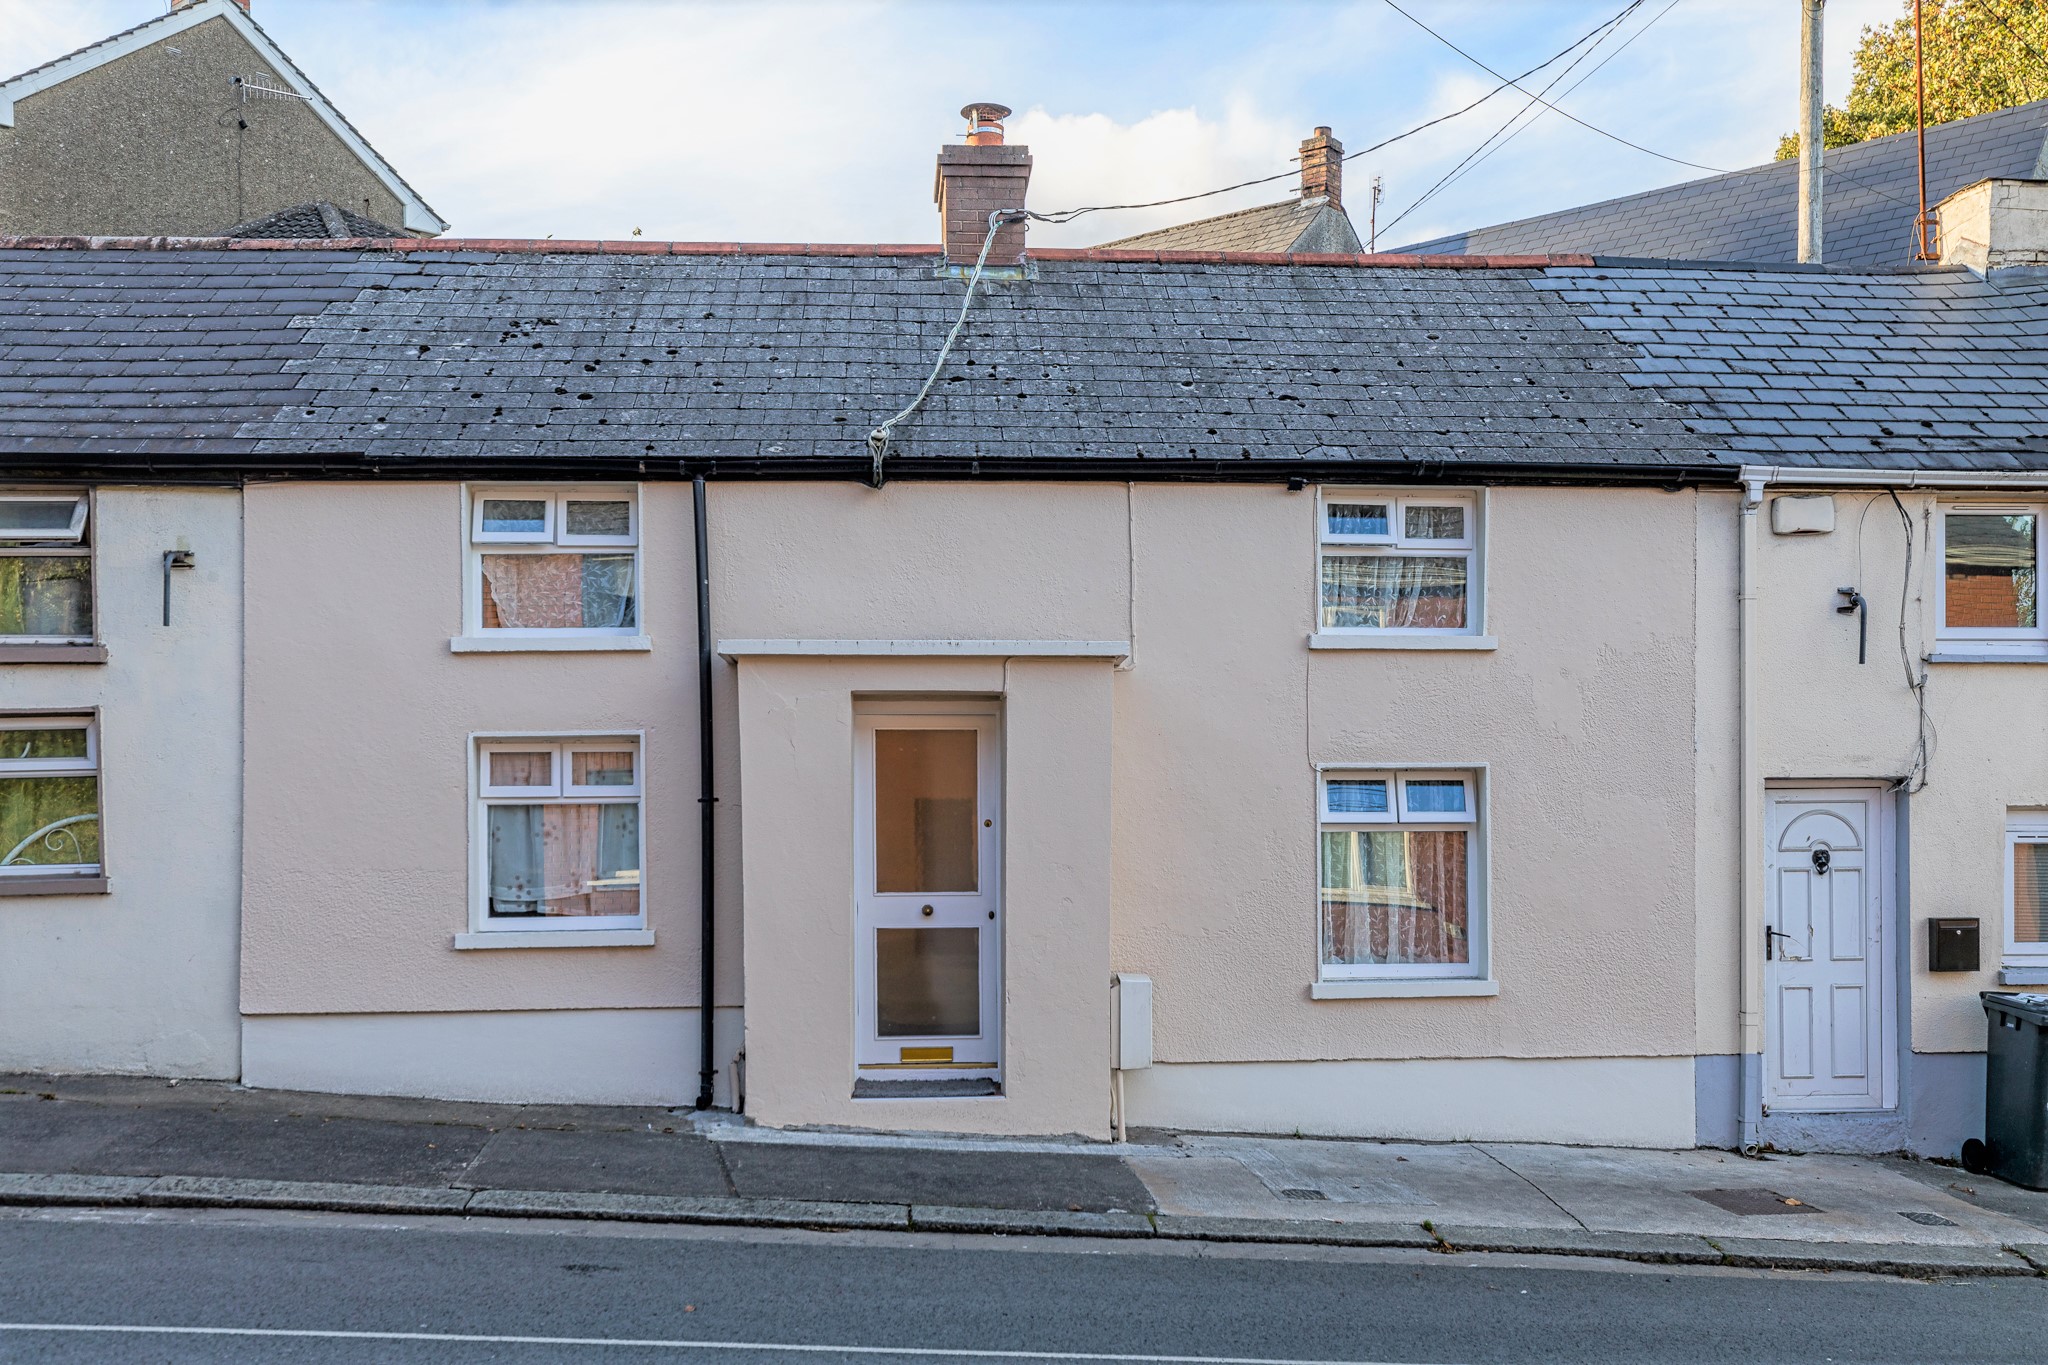 42 Mary Street Drogheda Co Louth